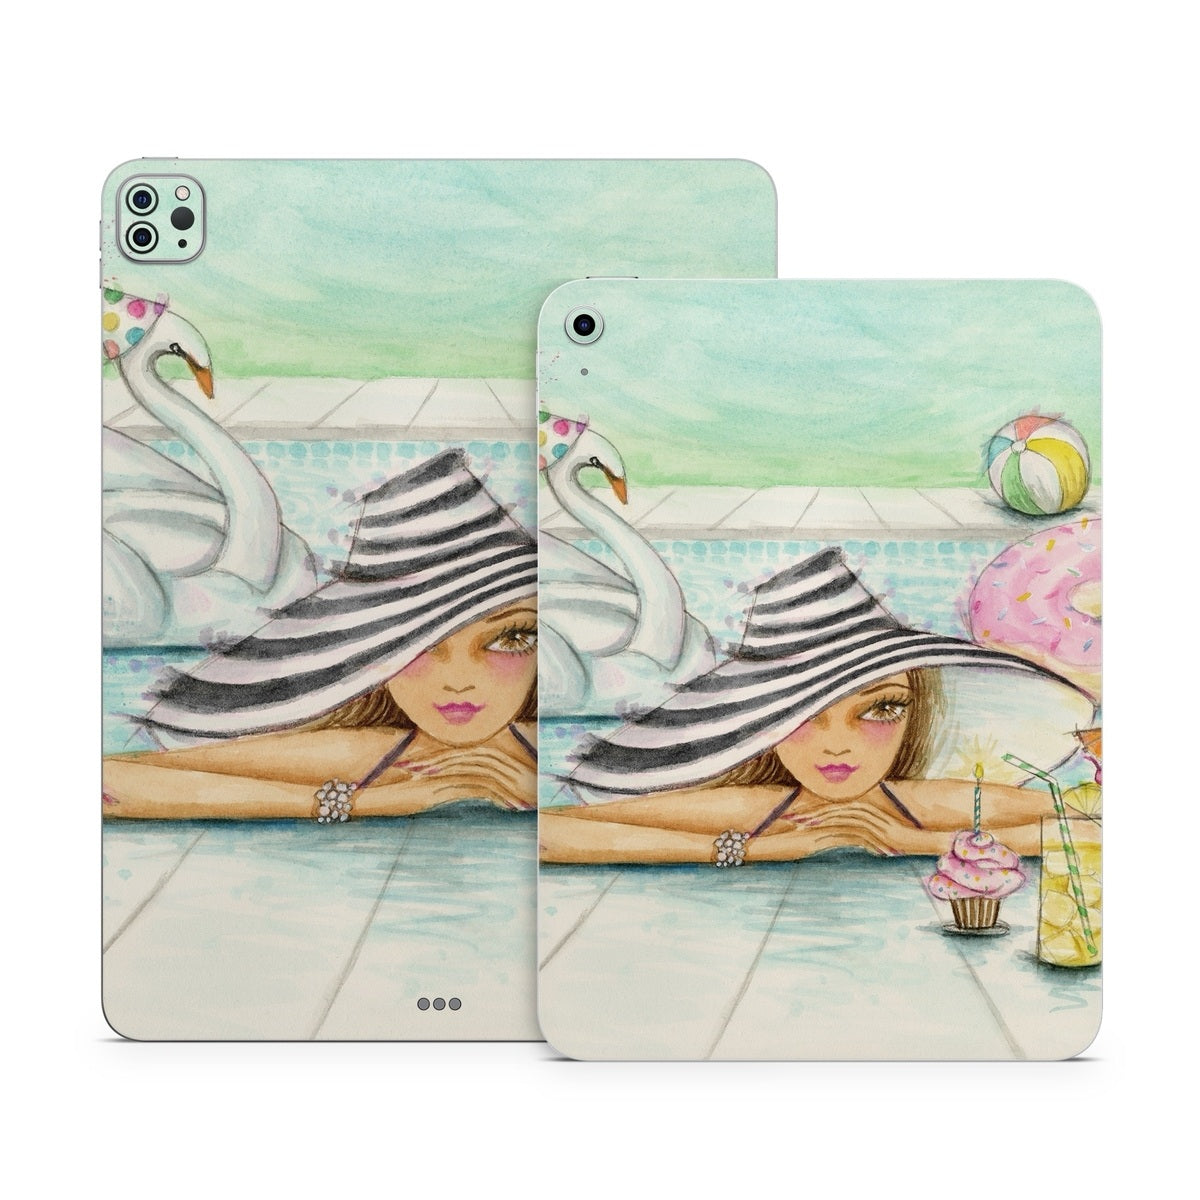 Delphine at the Pool Party - Apple iPad Skin